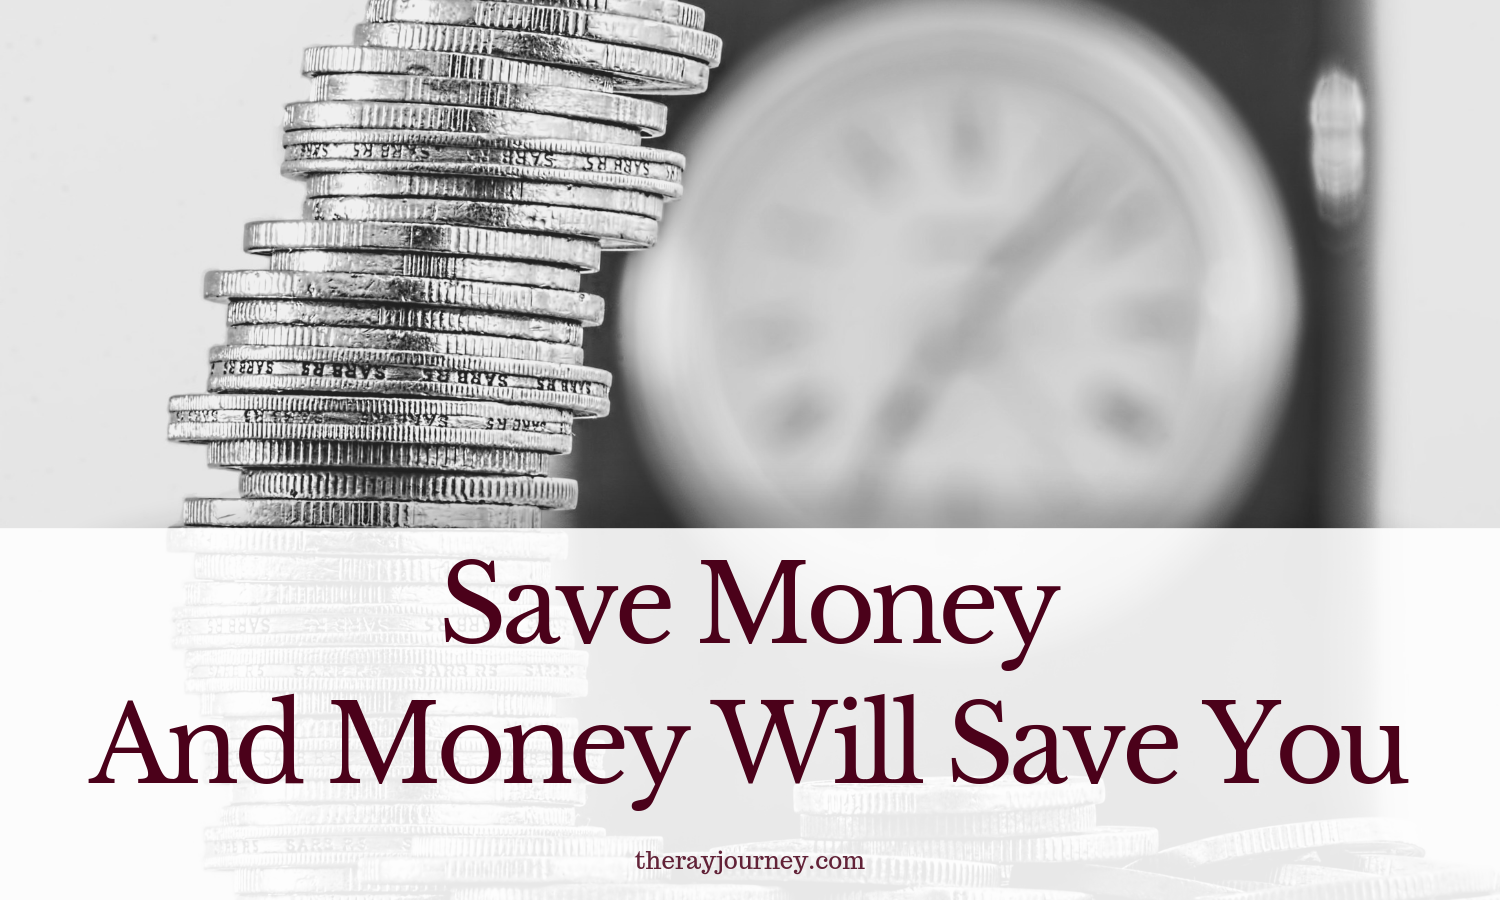 Save money and money will save you